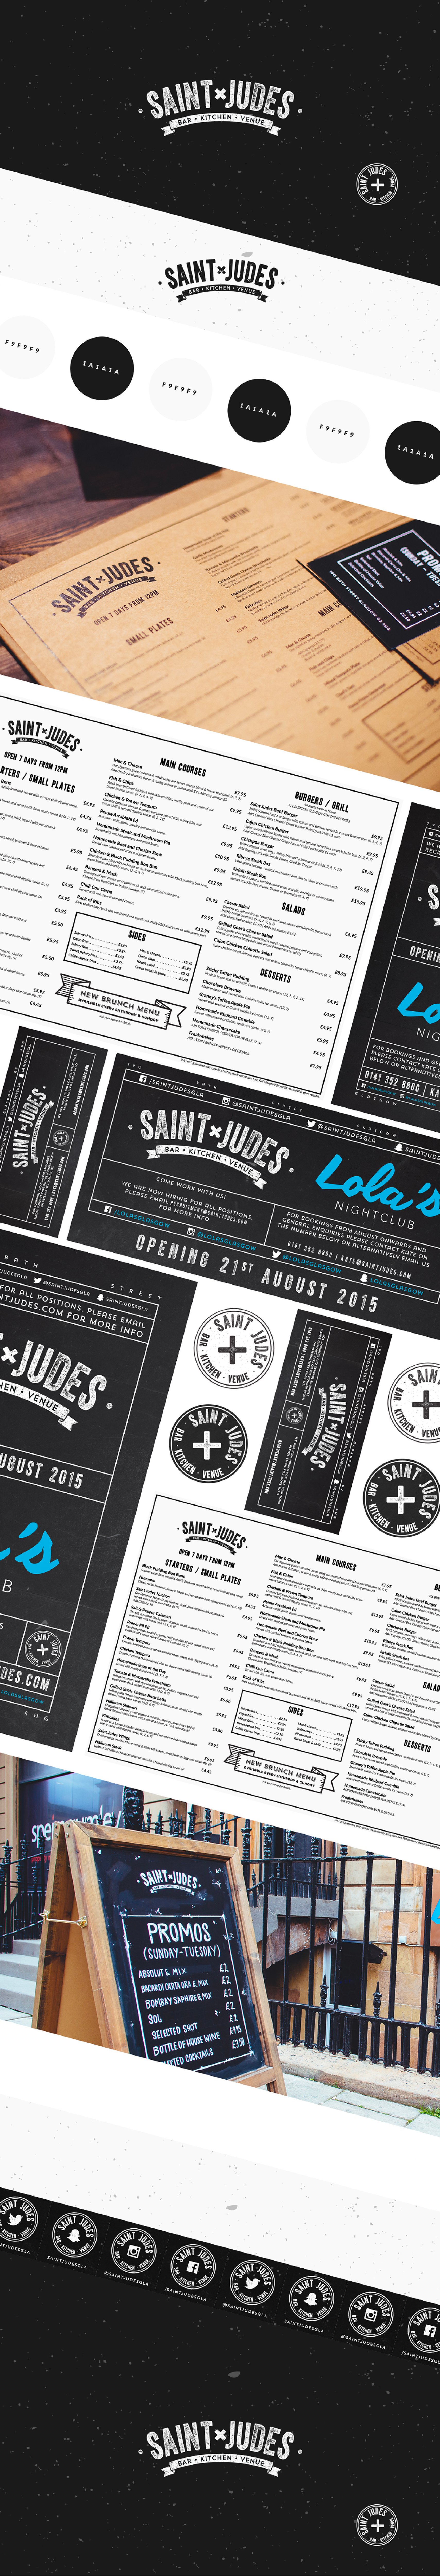 Saint Judes branding styles, fonts, colours, examples of print work